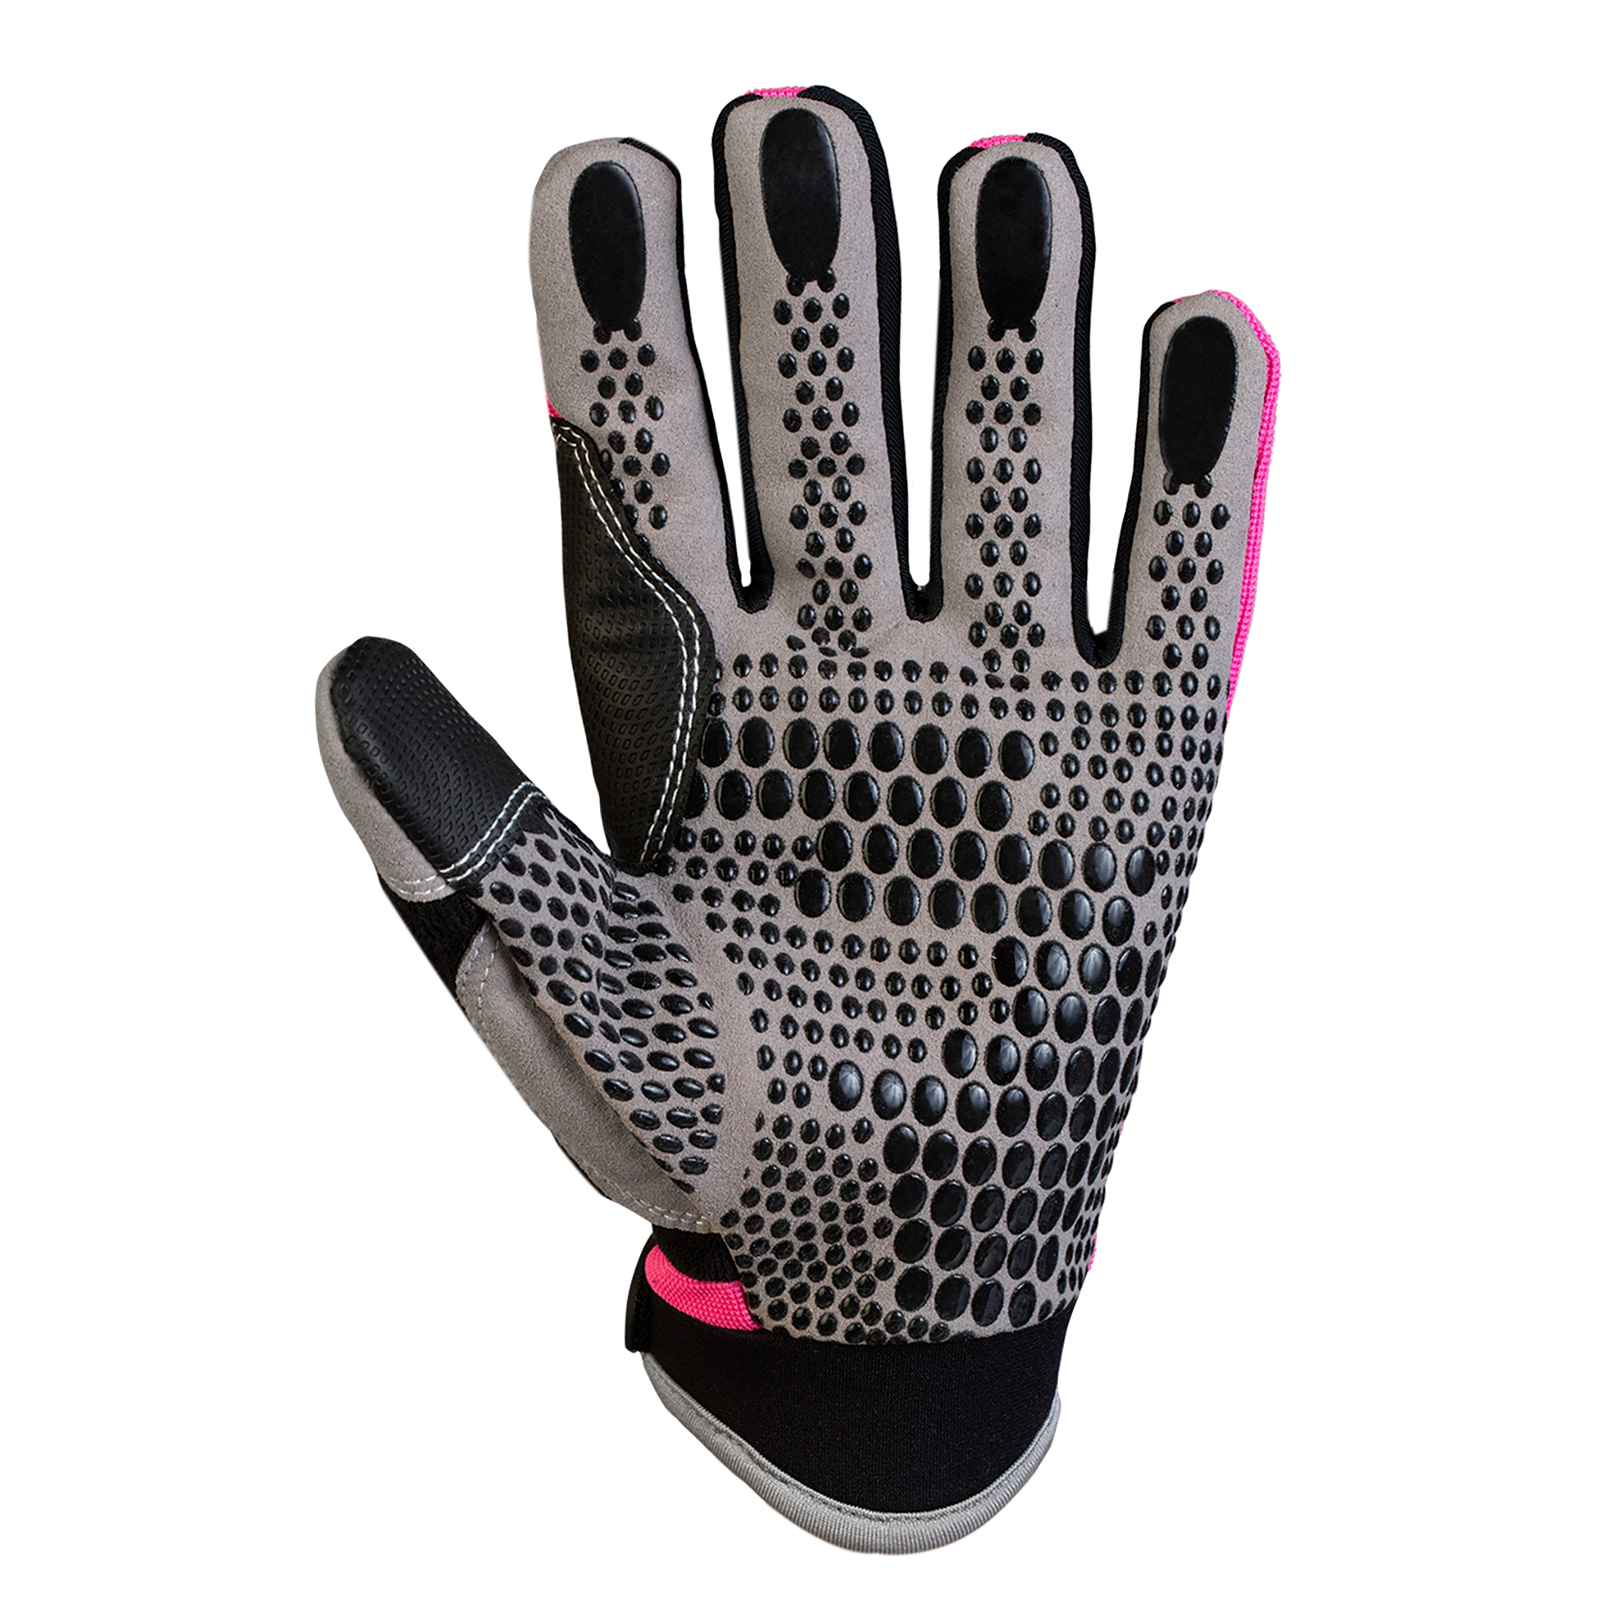 Palm view of  the pink JORESTECH breathable safety work glove with anti slip silicone black dotted palms